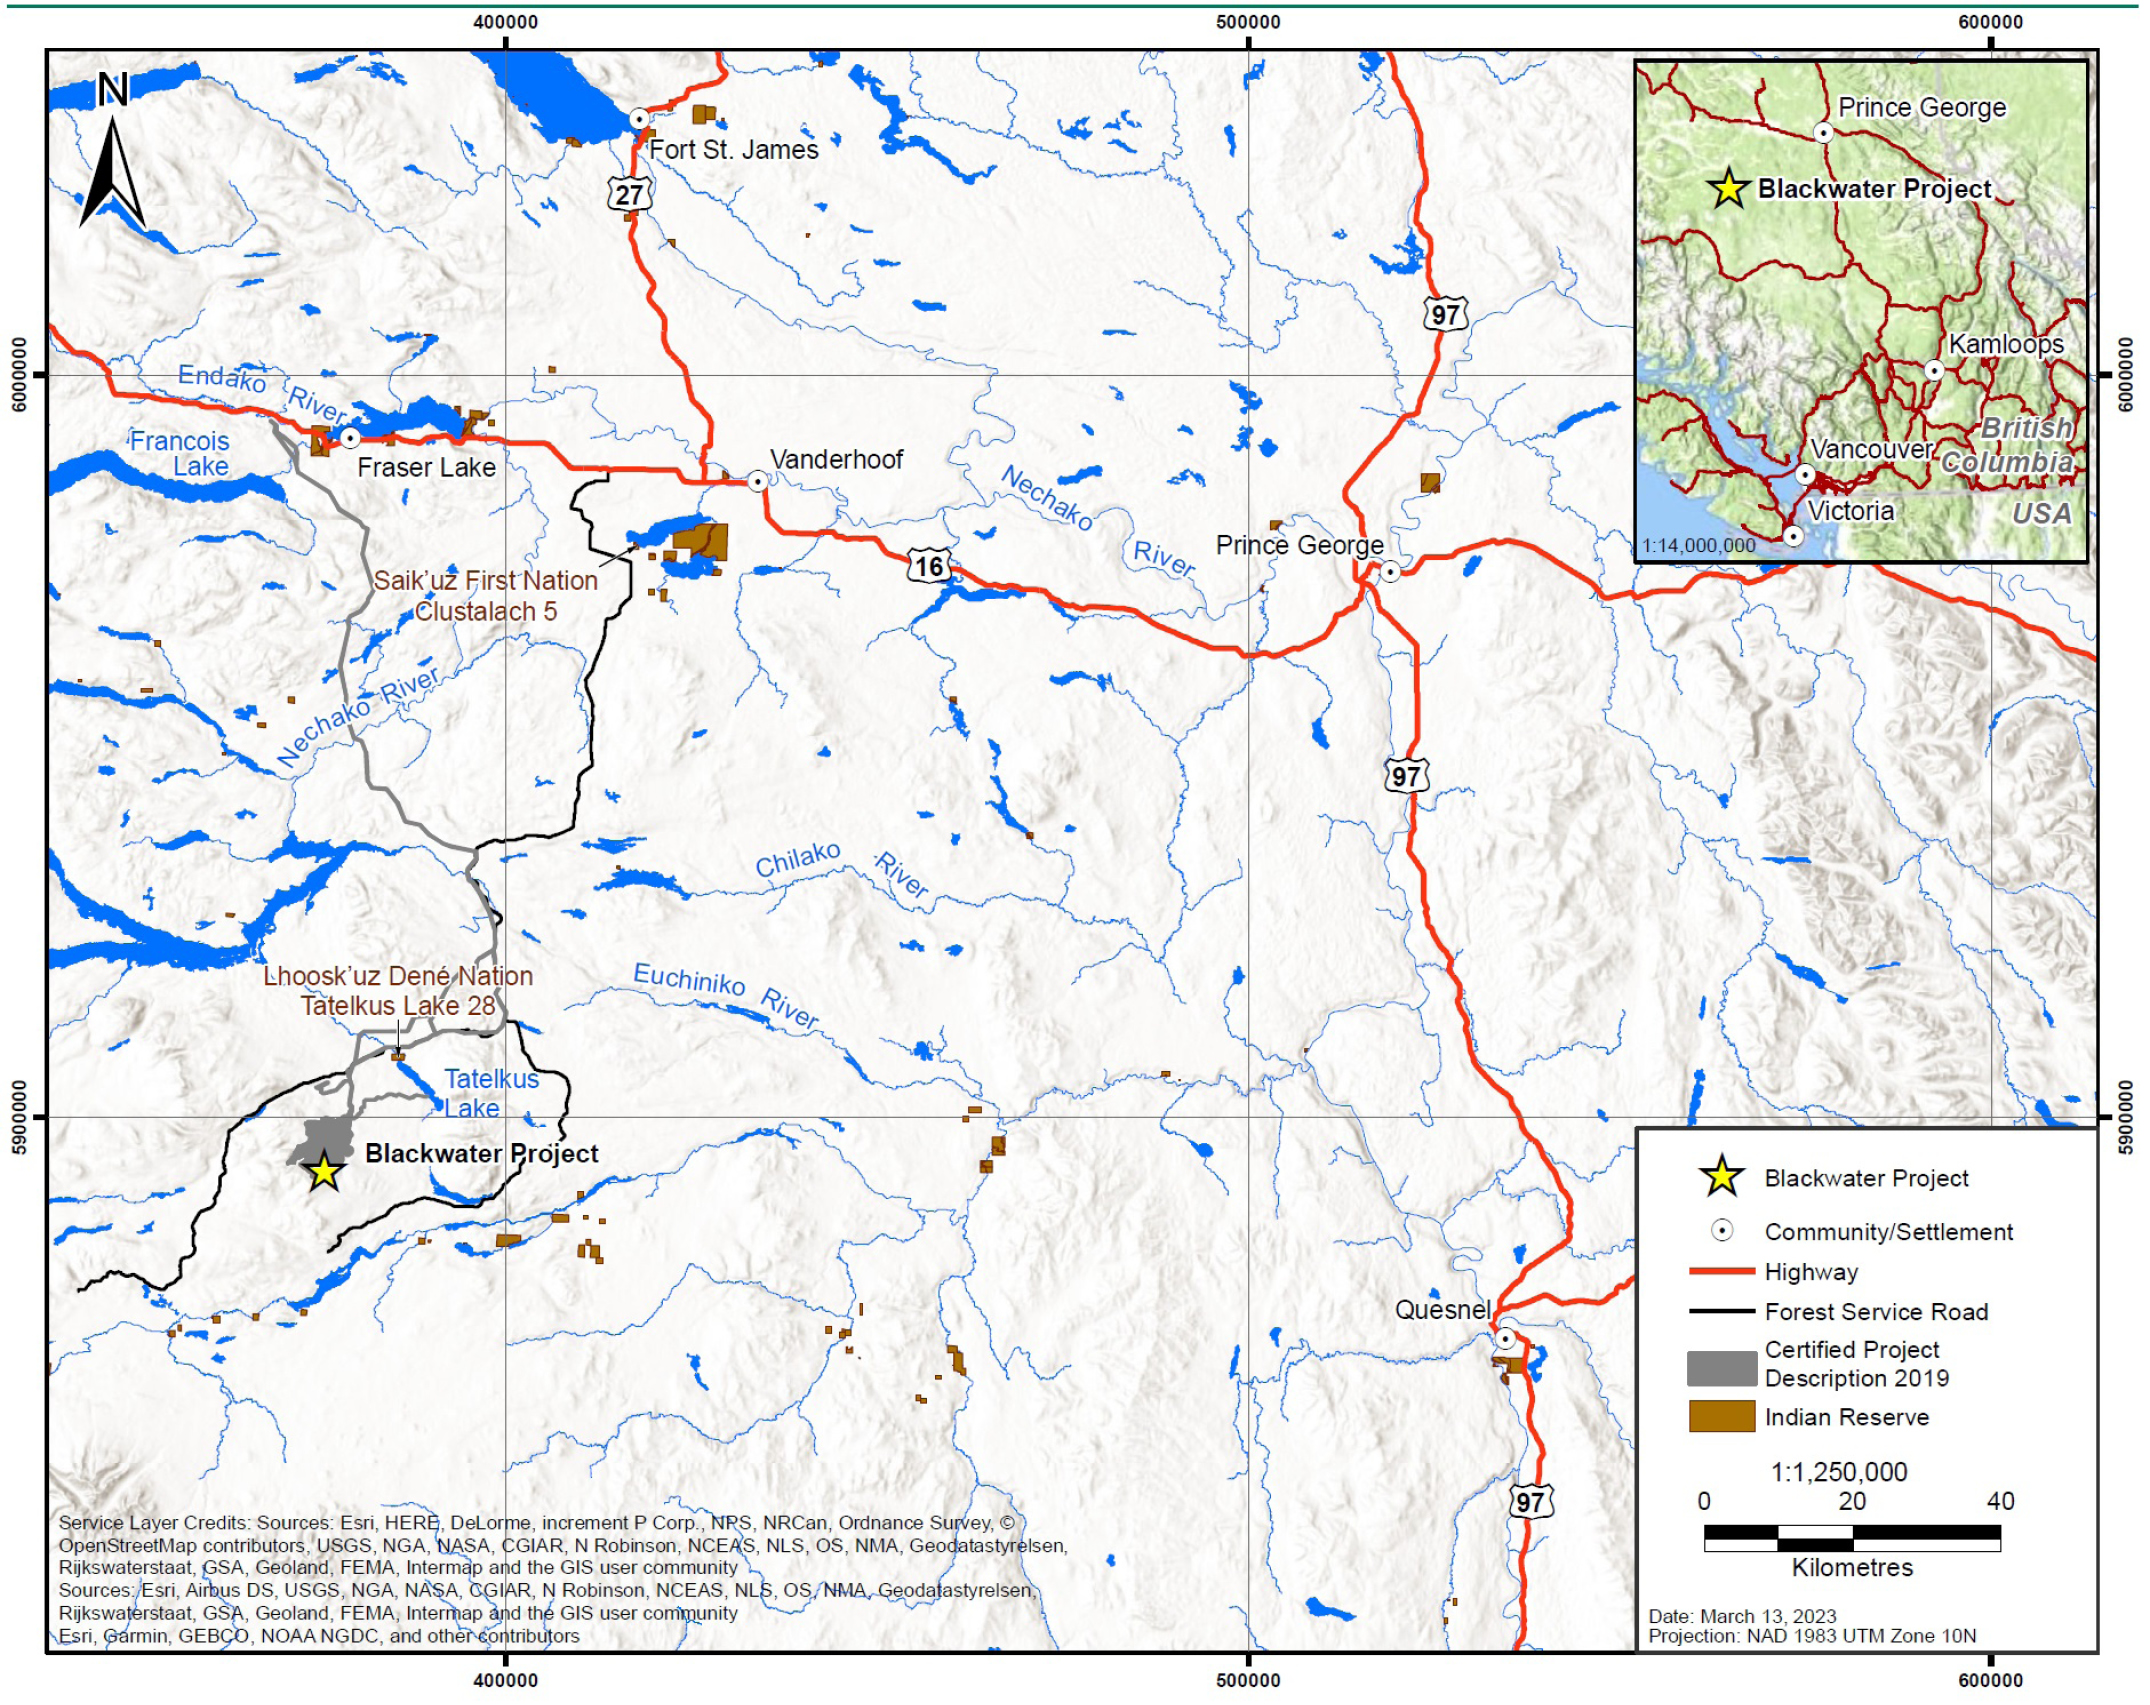 A 1:1,250,000 scale map shows the general location of the Blackwater Gold Project in British Columbia – Text version below the image